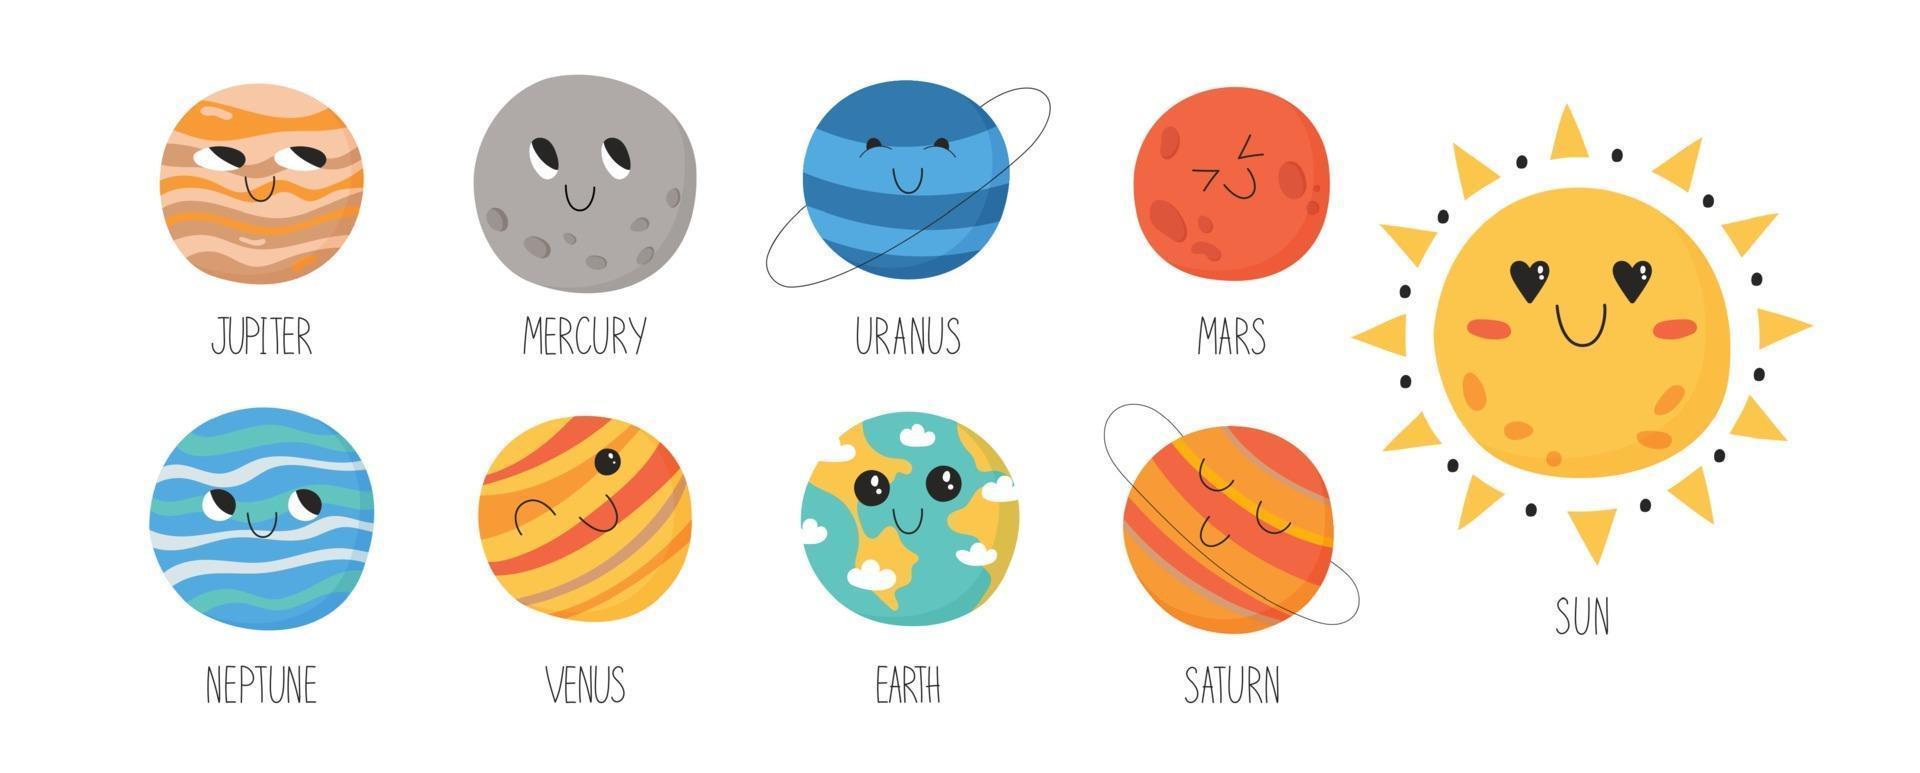 Cute Solar System Planets for Children vector